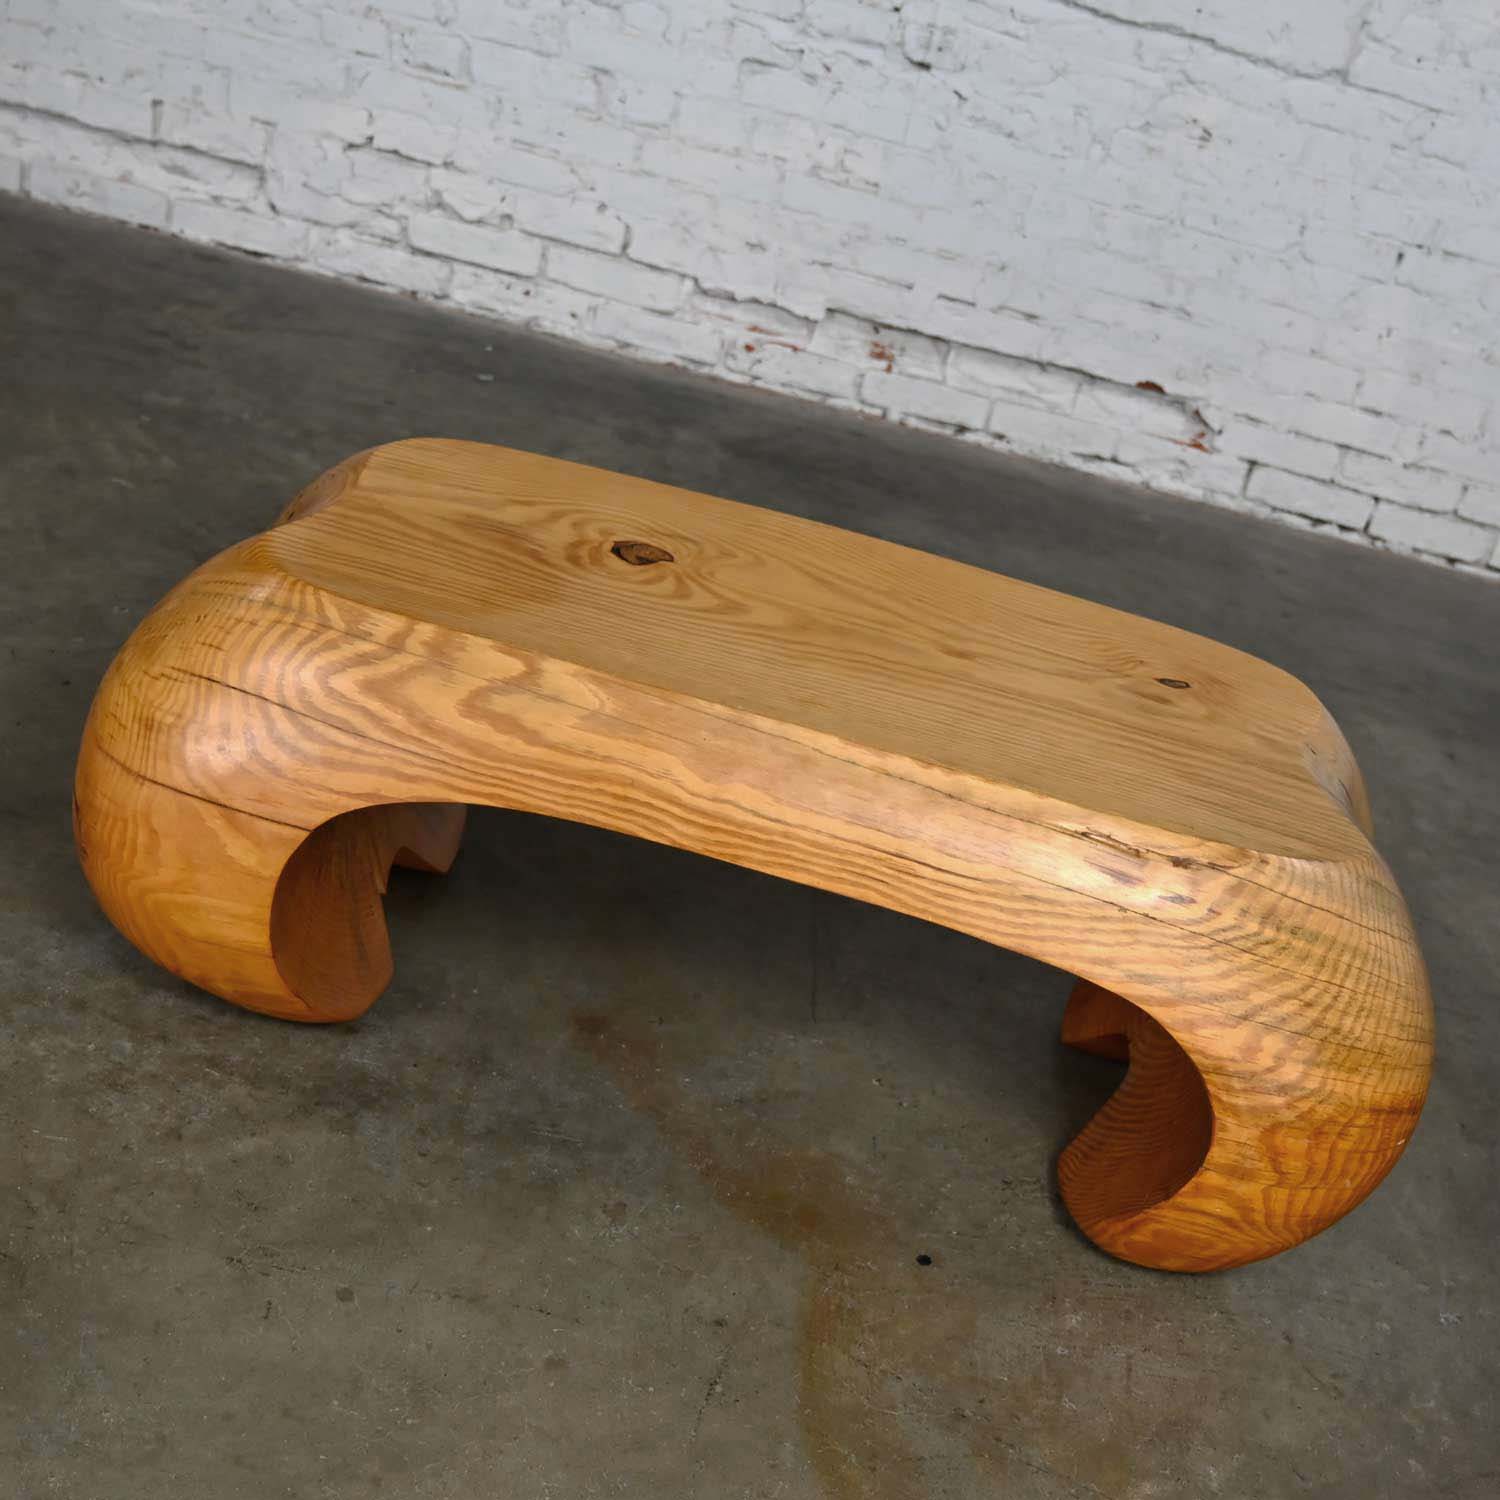 Postmodern Natural Sculpted Solid Heartwood Pine Bench or Coffee Table Style of Carl Gromoll or Wendell Castle